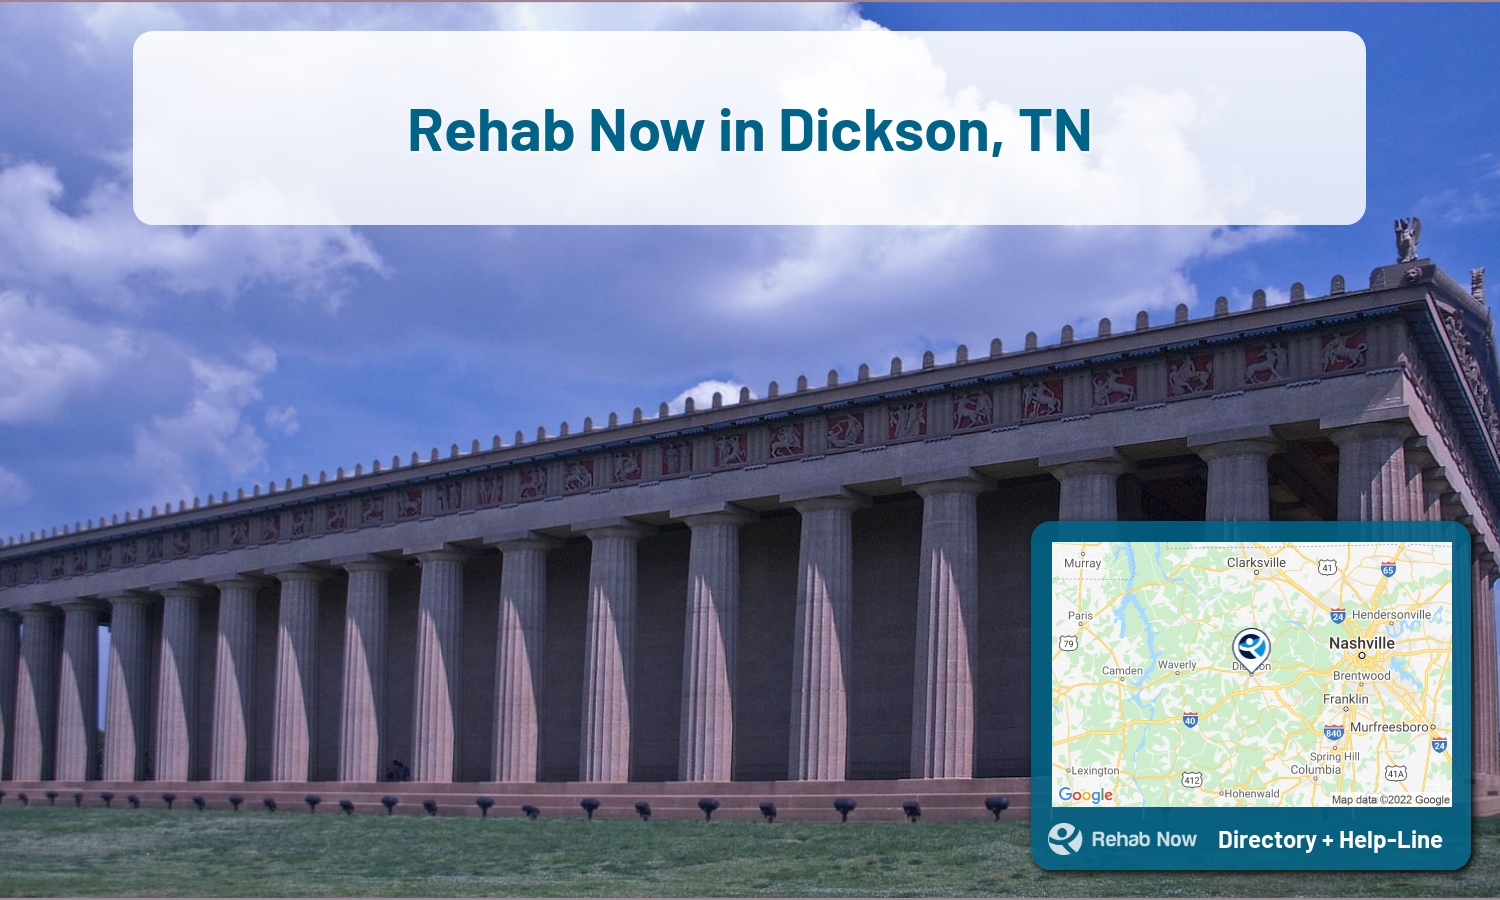 List of alcohol and drug treatment centers near you in Dickson, Tennessee. Research certifications, programs, methods, pricing, and more.